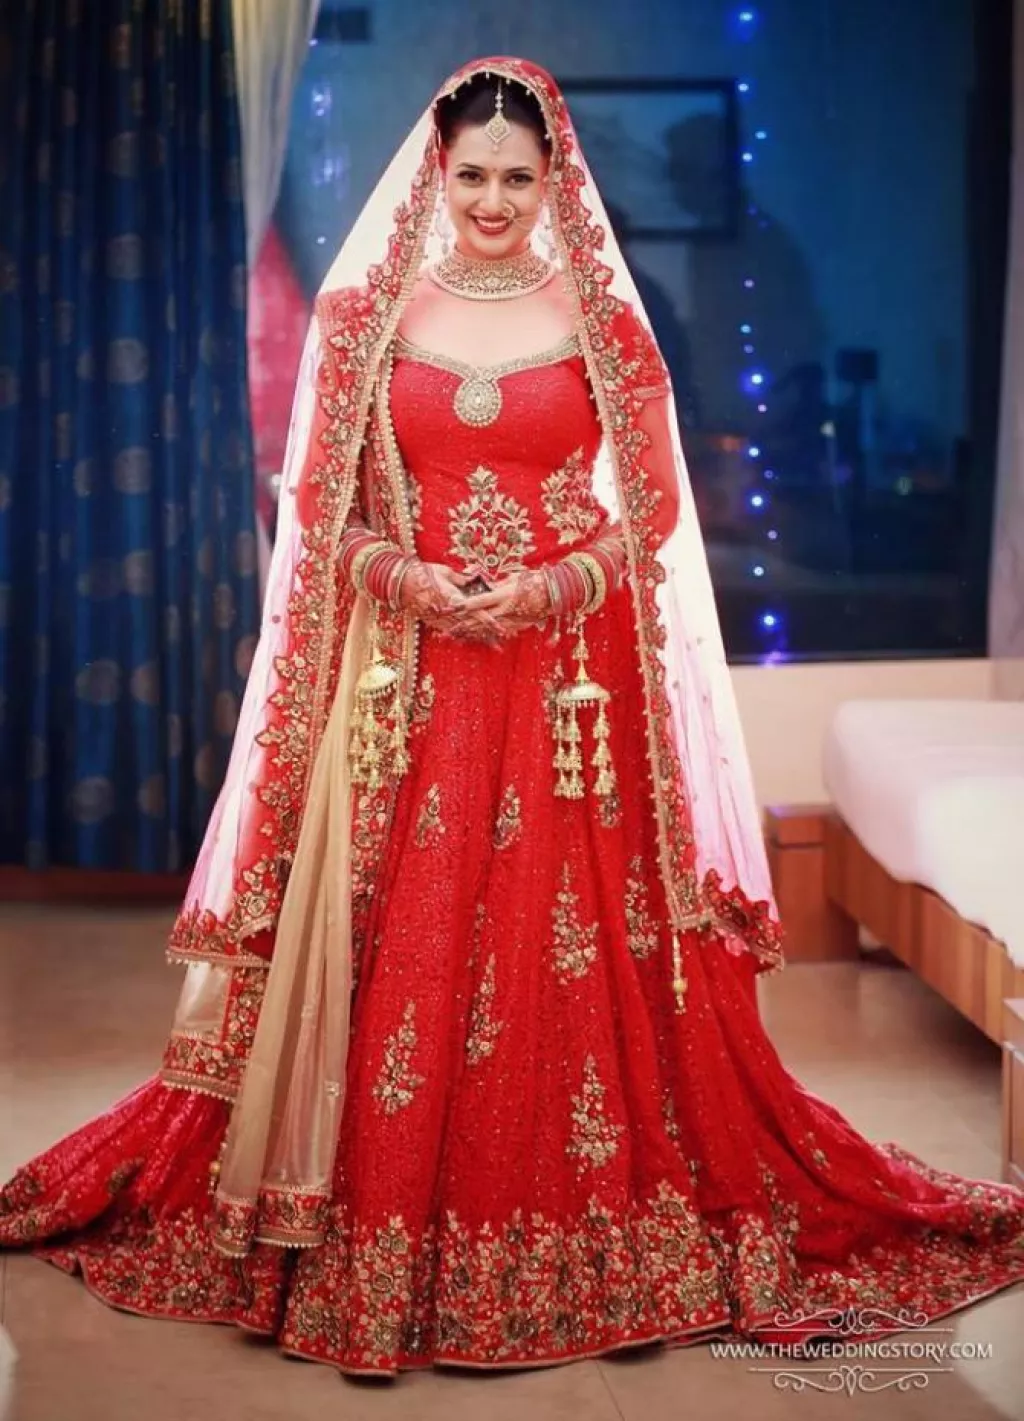 5 Ways In Which The Colour 'Red' Is Deeply Connected To Indian Weddings